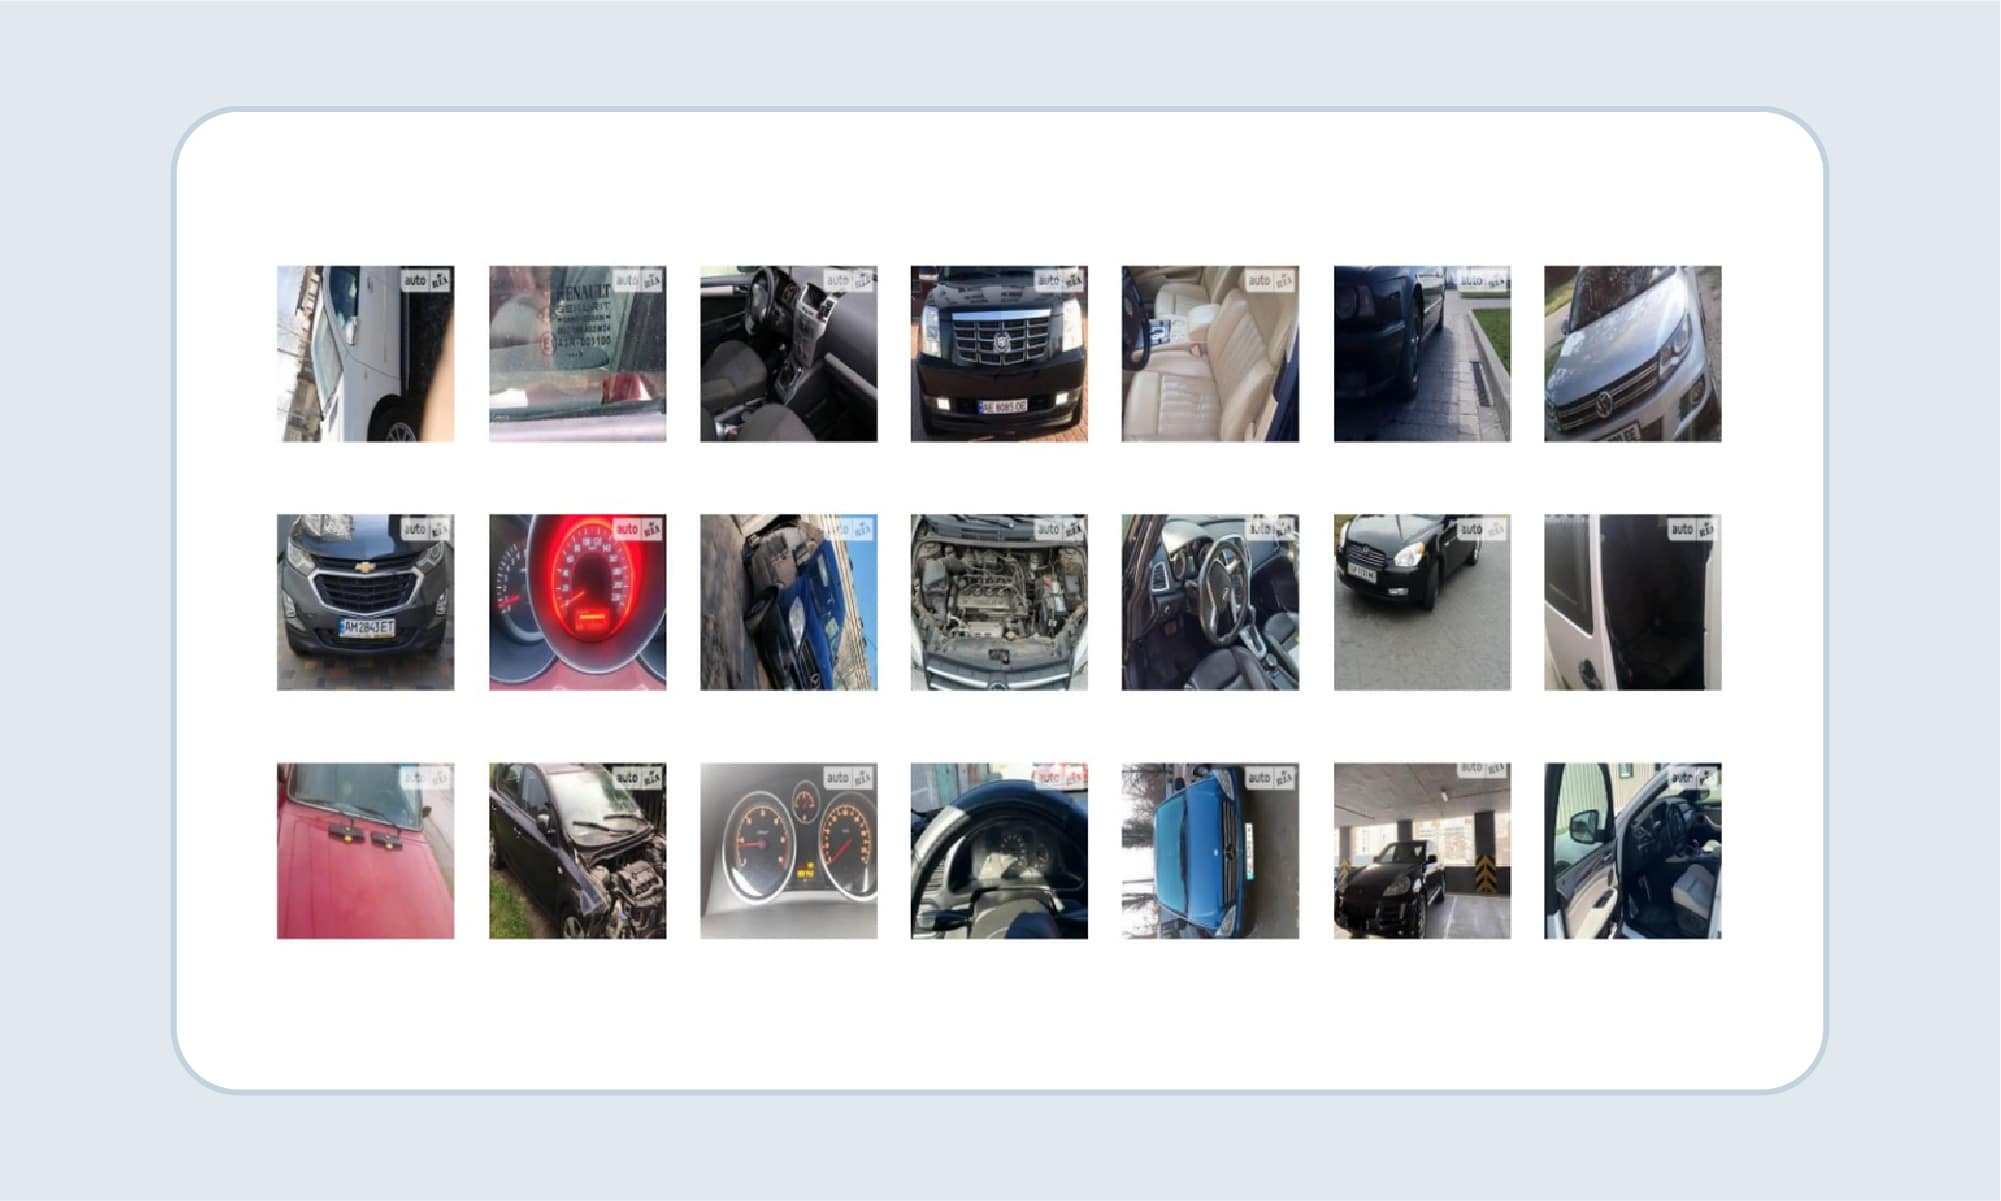 The example of car images that were removed from the dataset